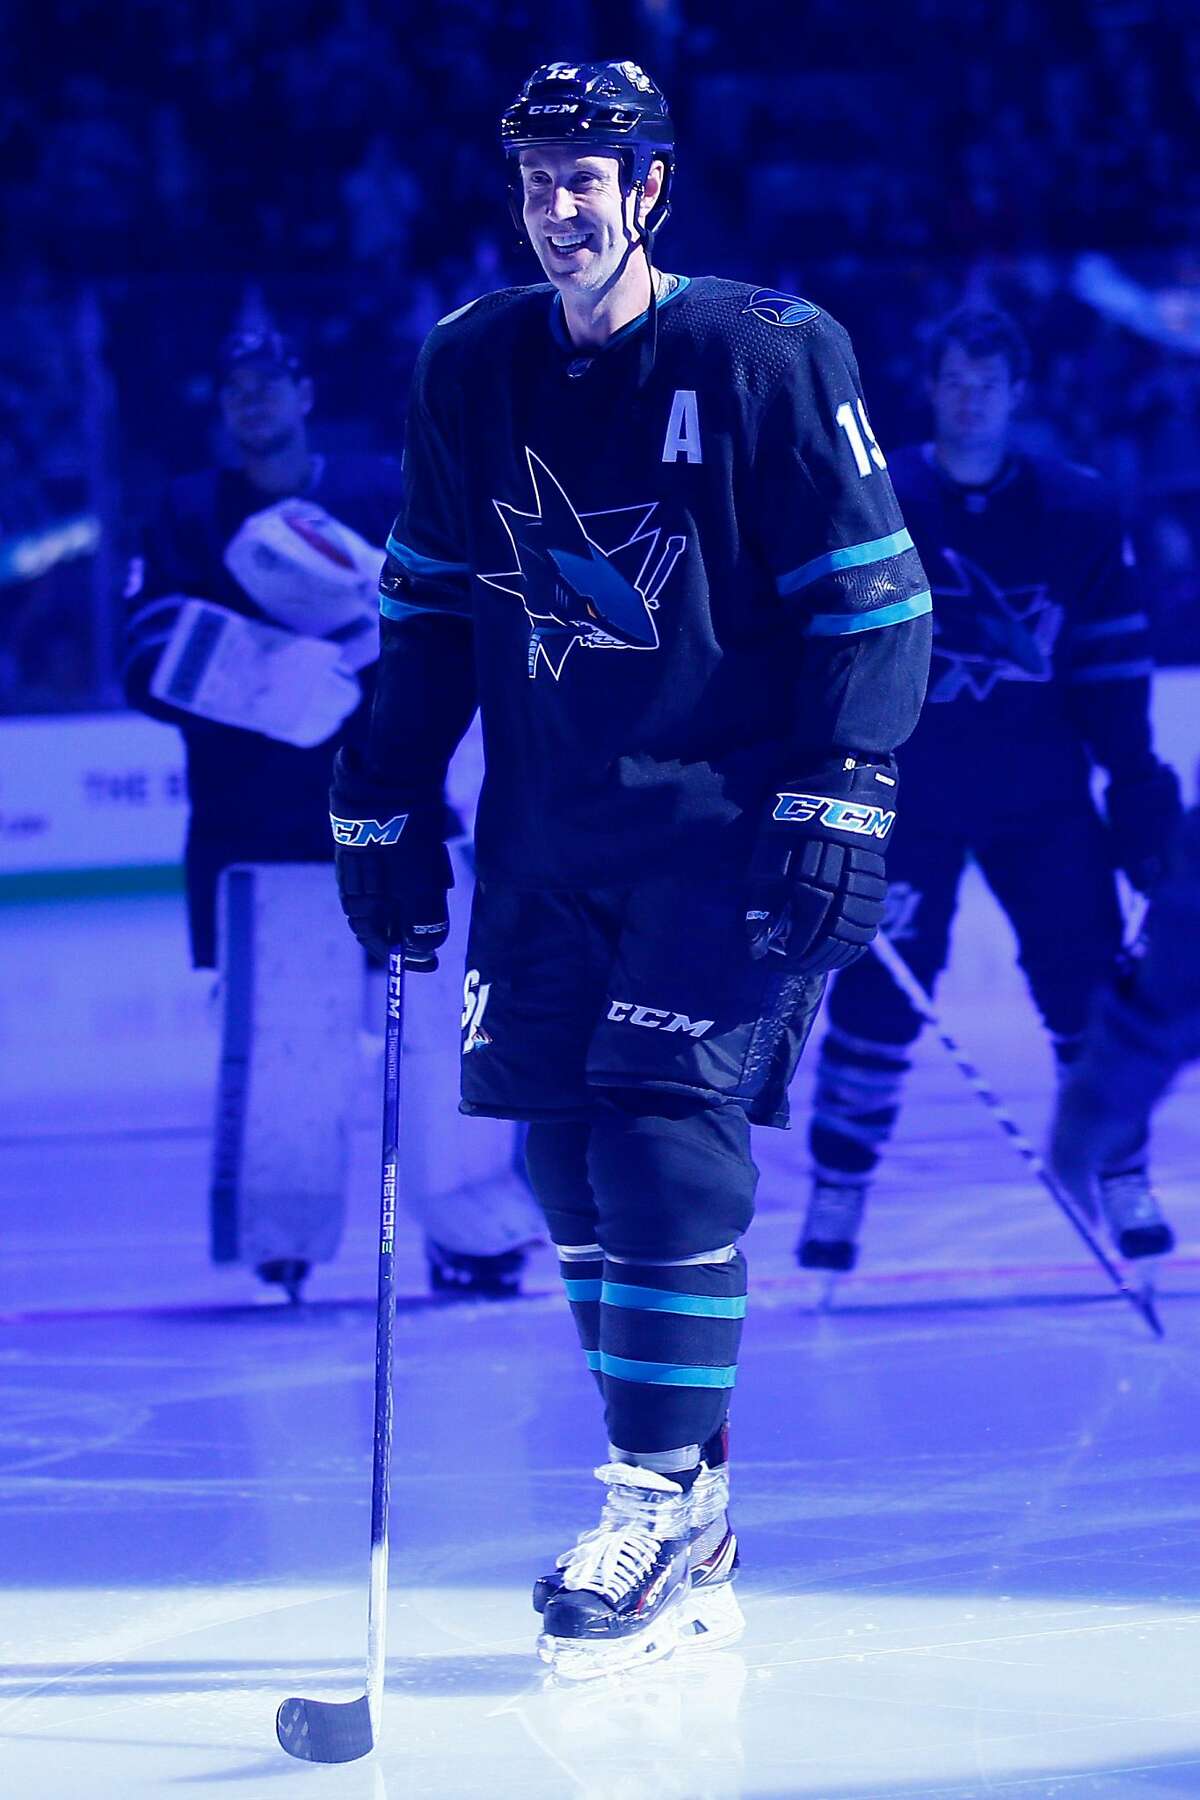 End of an era: San Jose Sharks' Joe Thornton moves on, signs 1-year deal  with Maple Leafs - ABC7 San Francisco